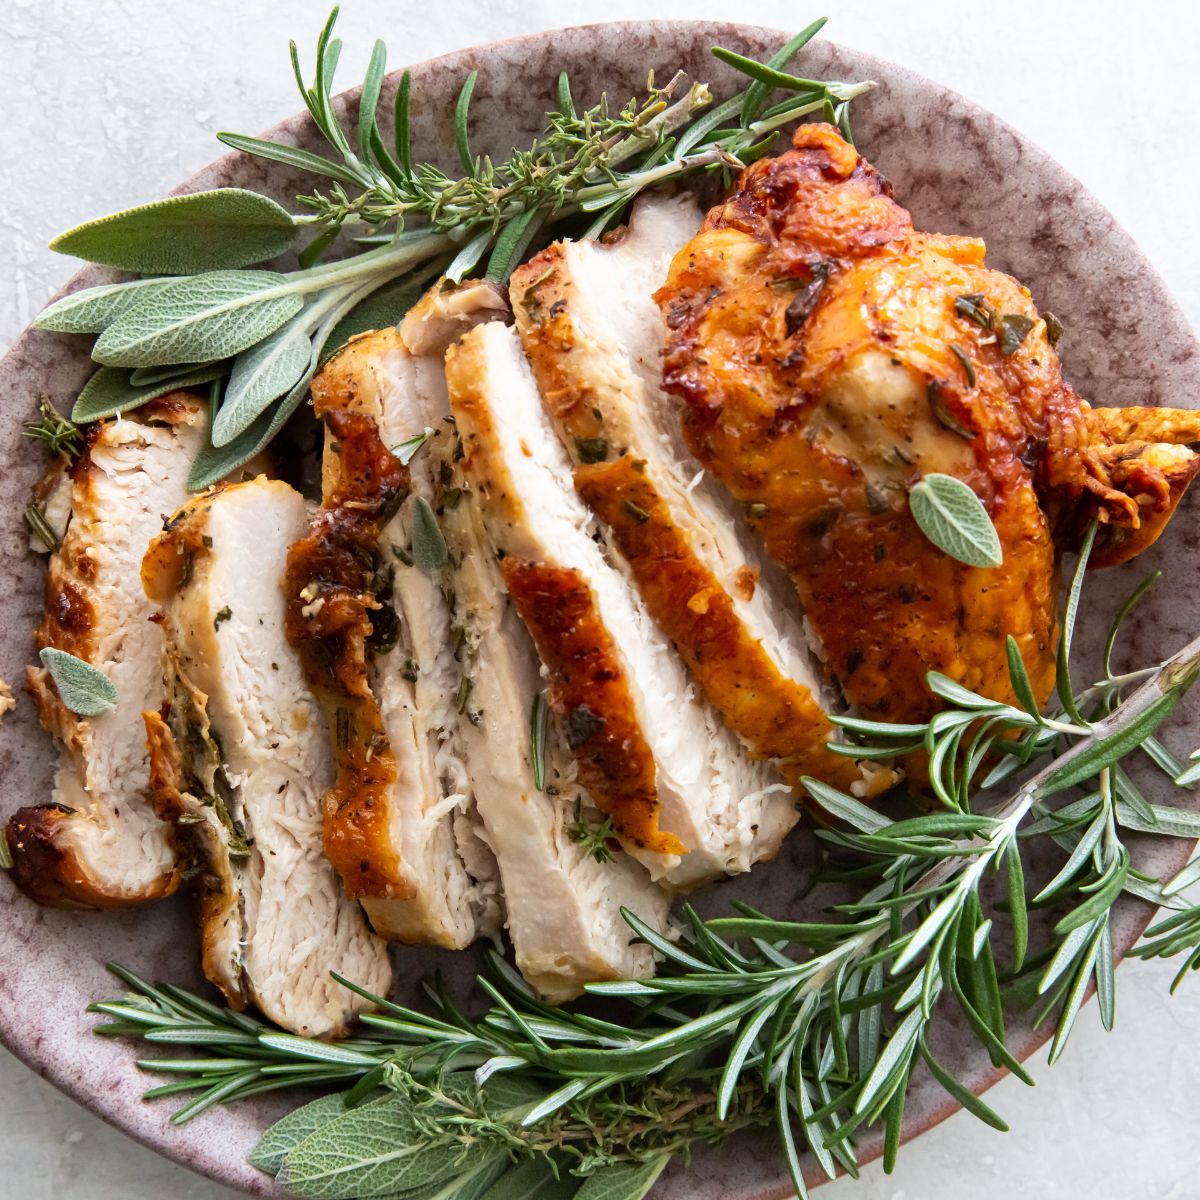 Sliced chicken breast with rosemary sprigs on a plate.